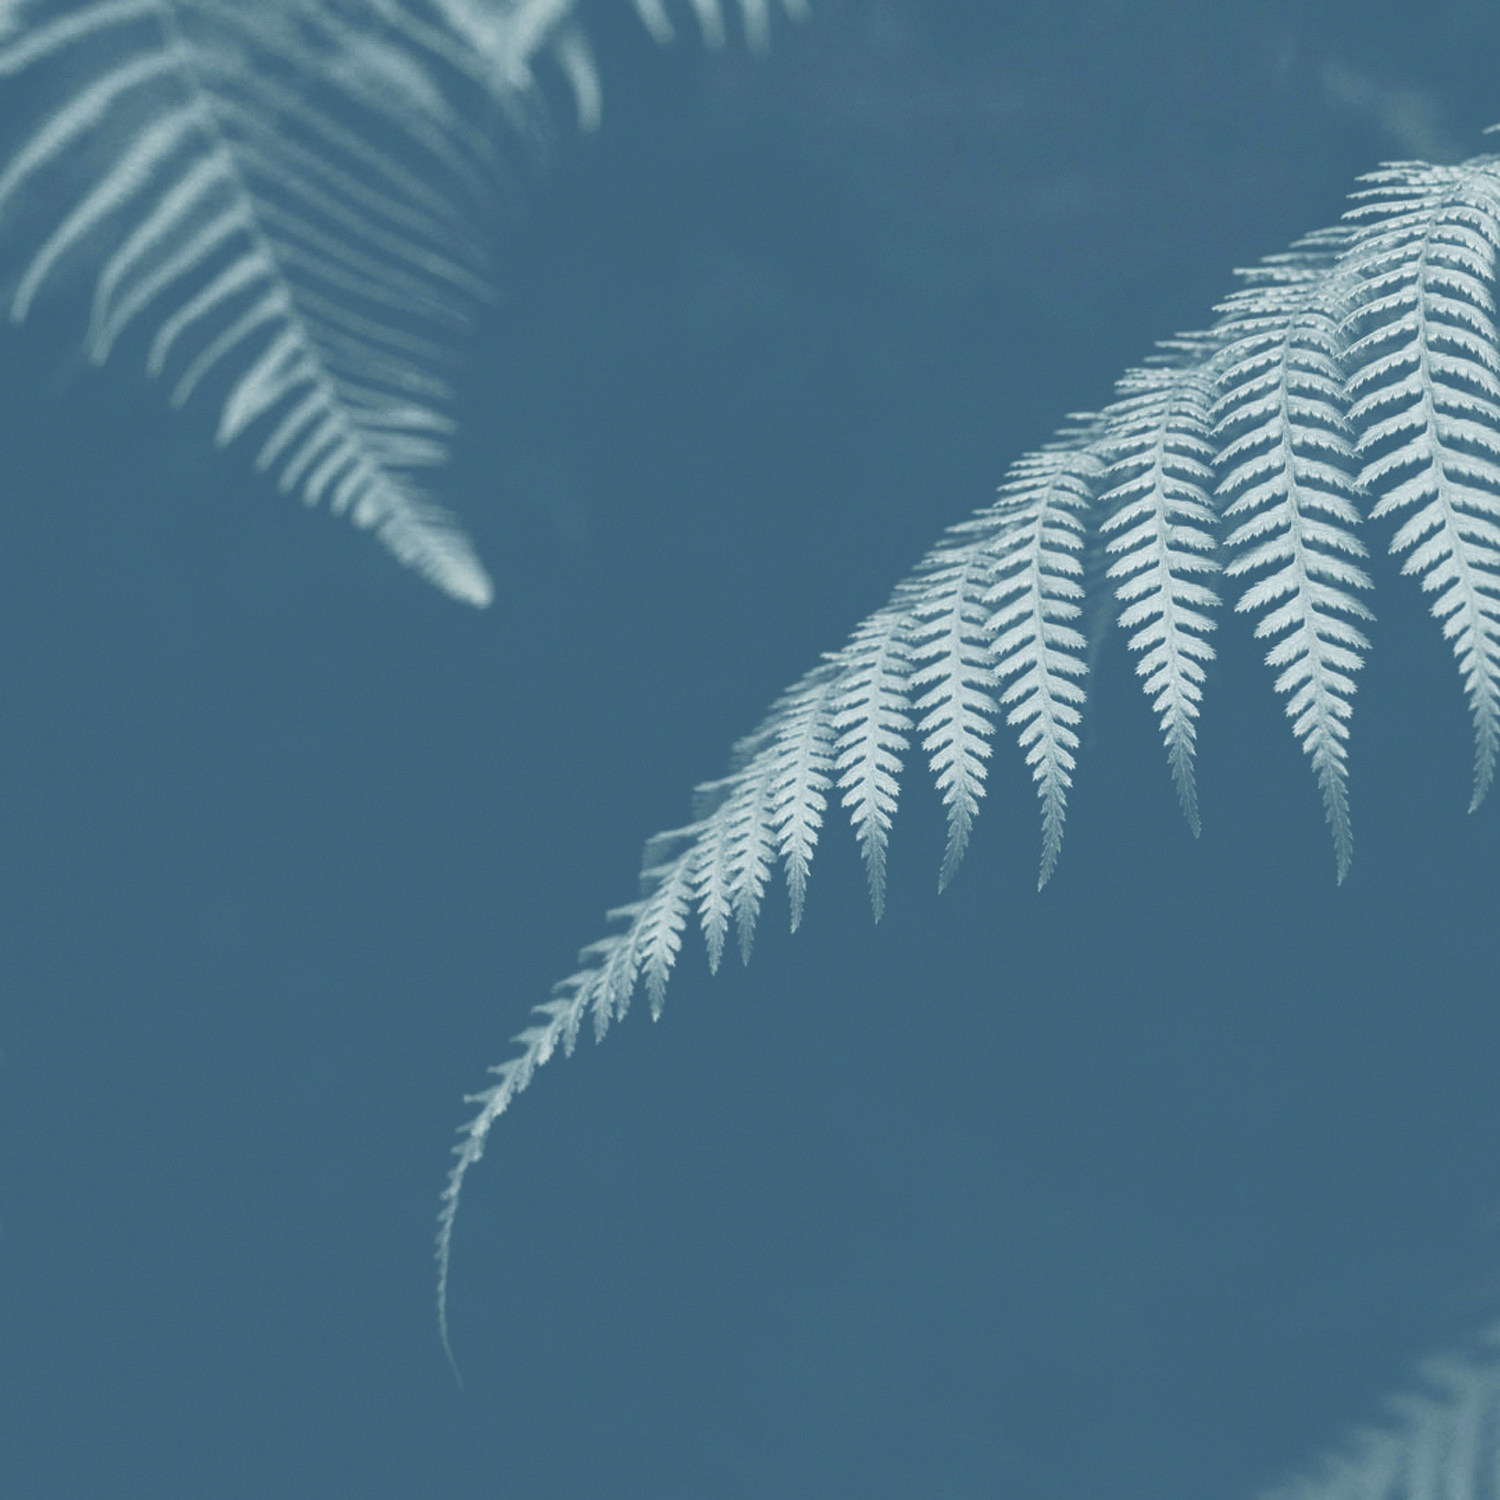 An image featuring a duotone photograph of a fern serves as an example of the image style used in the Akoako brand. The fern is shown in shades of grey. This style can be used as a background.